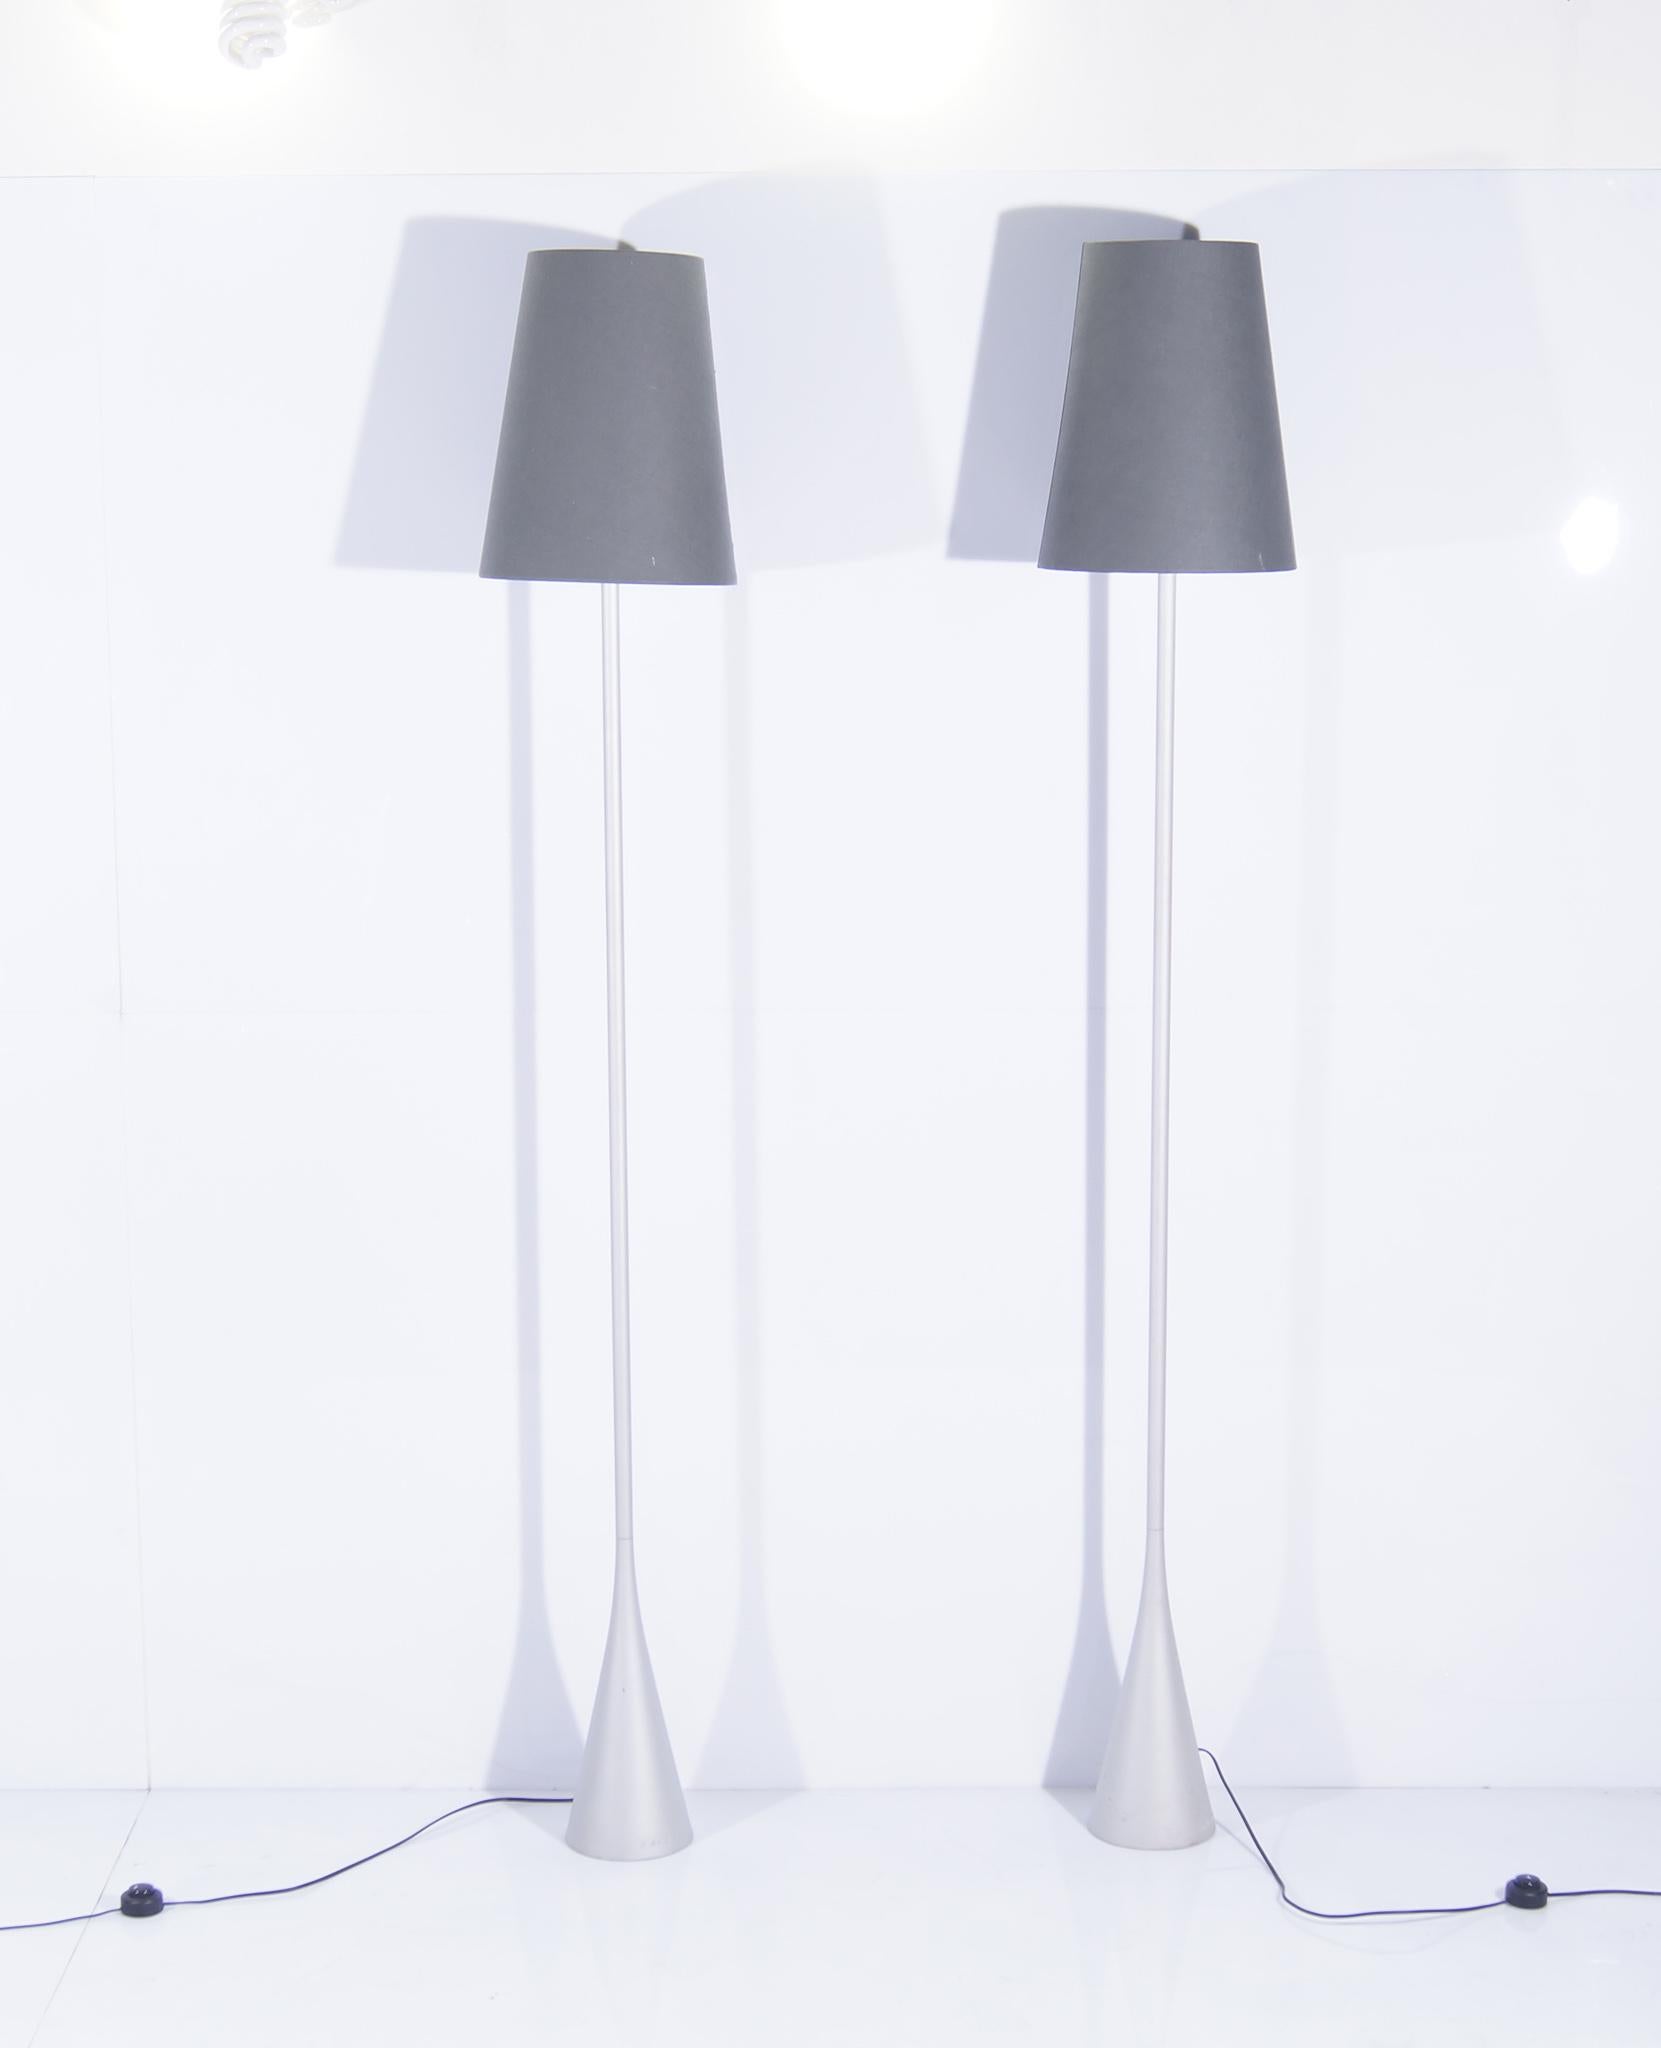 Pascal Mourgue for Ligne Roset - Floorlamps - set of 2
 

Minimalist design! Great design lamp Pascal Mourgue for your Stuga: The elegant lamp is of high quality and well preserved. They are made of metal and plastic and are perfect as an